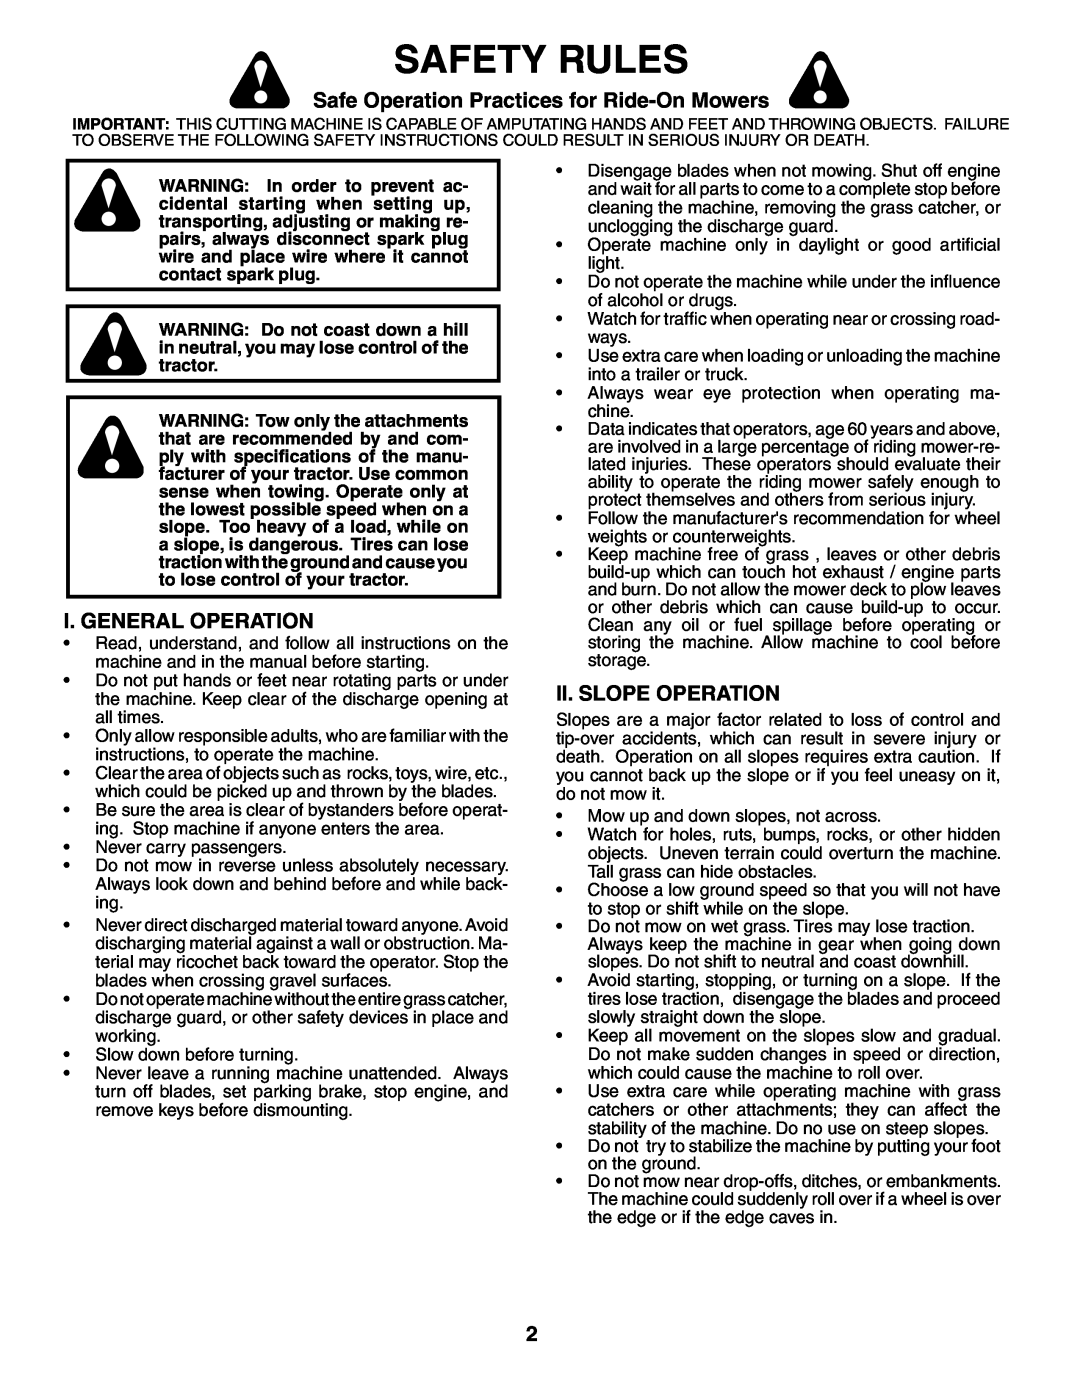 Husqvarna CTH180 XP 02764 owner manual Safety Rules, Safe Operation Practices for Ride-On Mowers, I. General Operation 